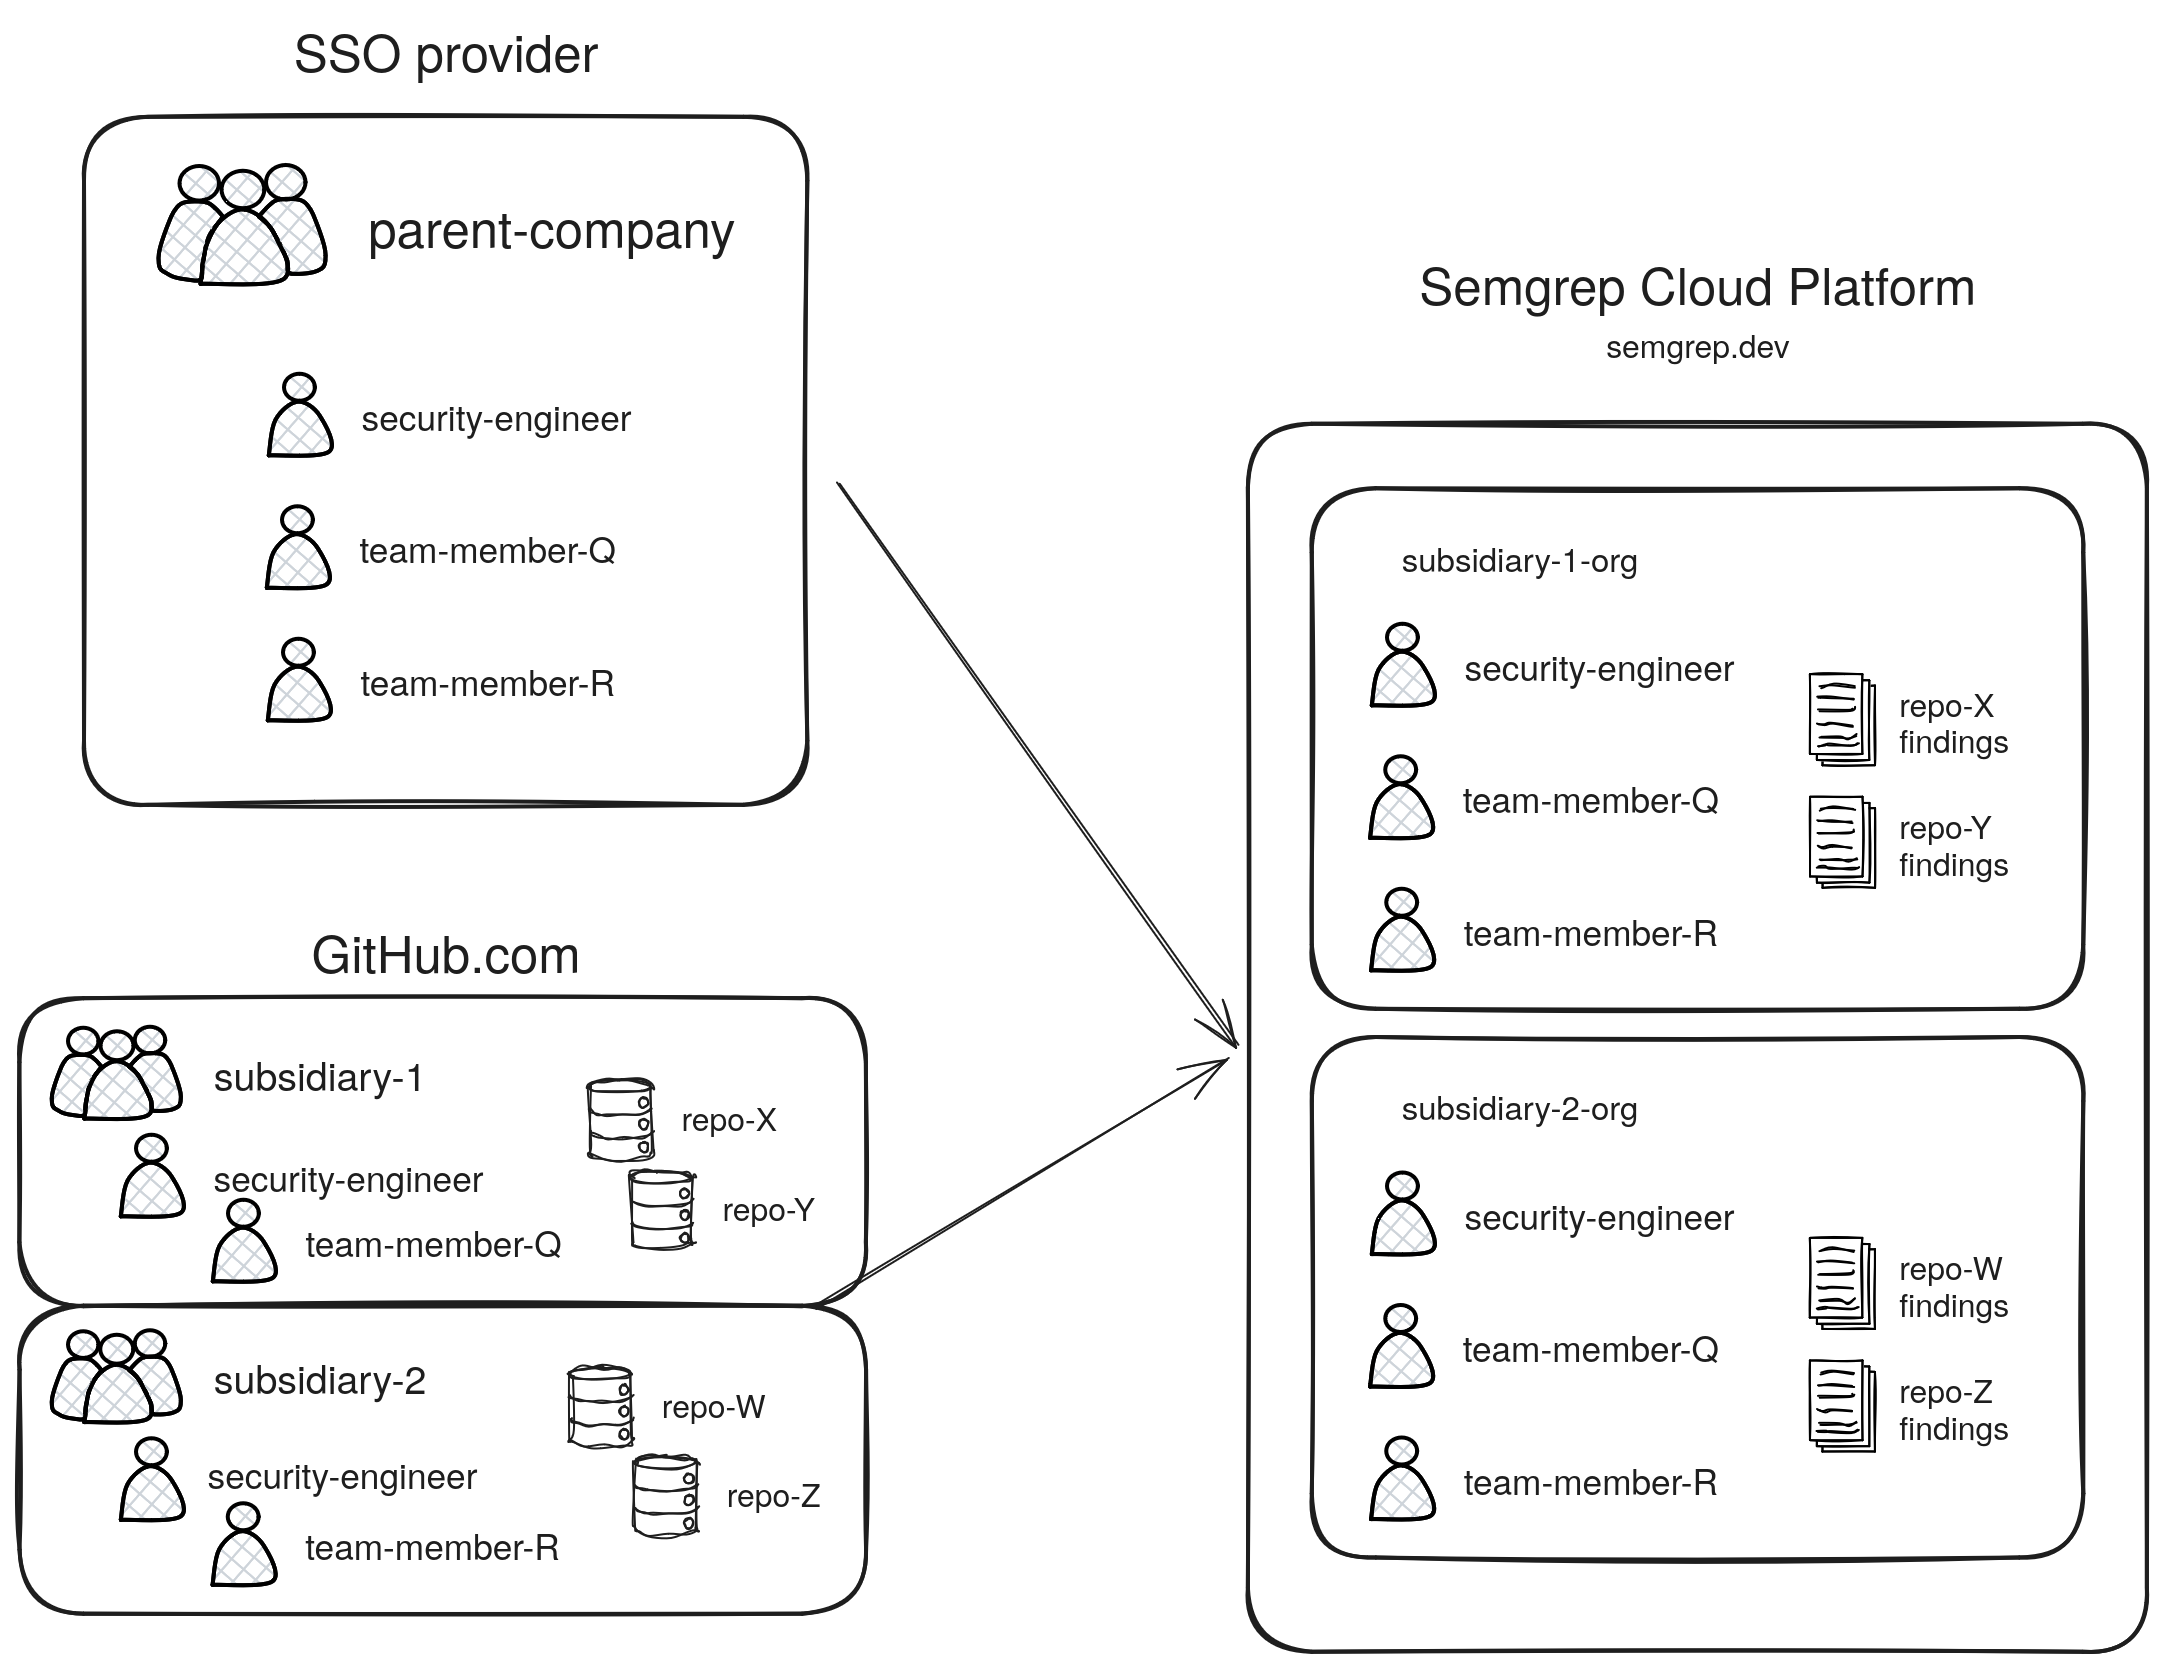 A complex organization setup using SSO and multiple GitHub orgs.